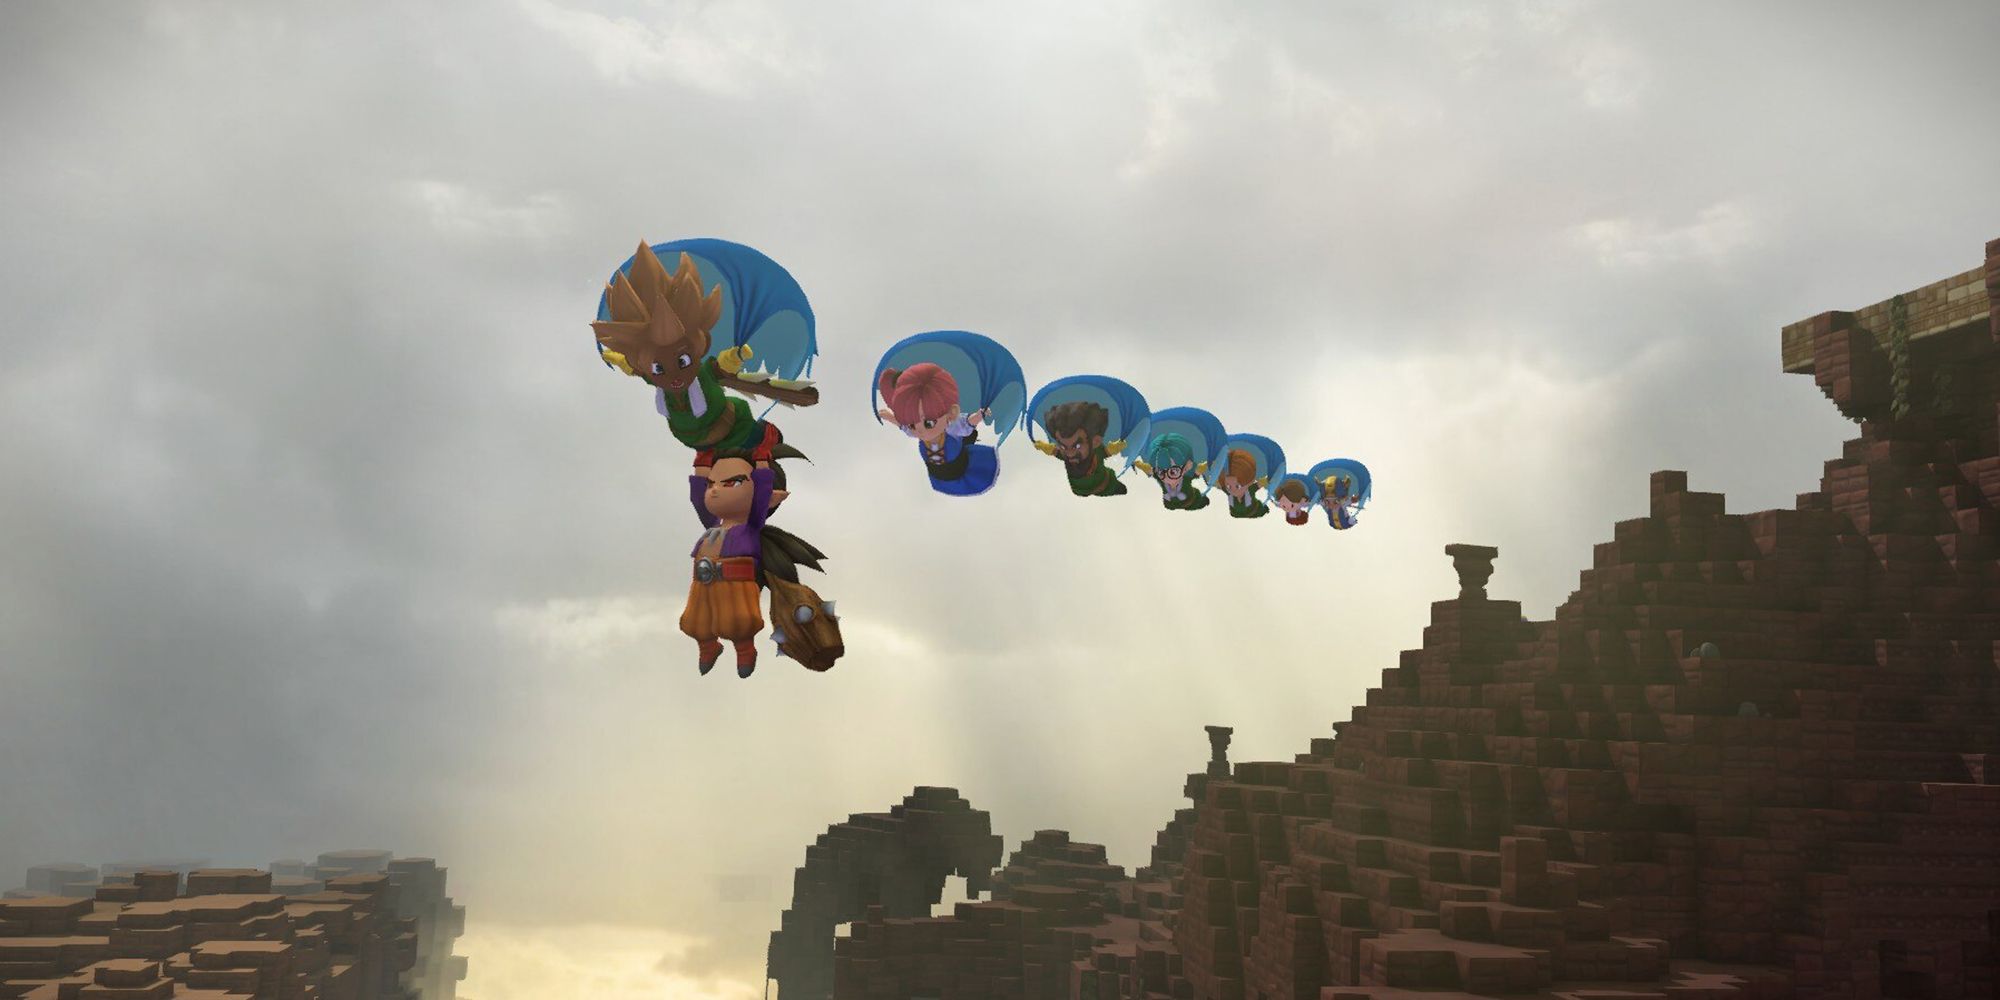 Dragon Quest Builders II - Getting the Furrofield Villagers Back To The Isle of Awakening to Unlock Multiplayer